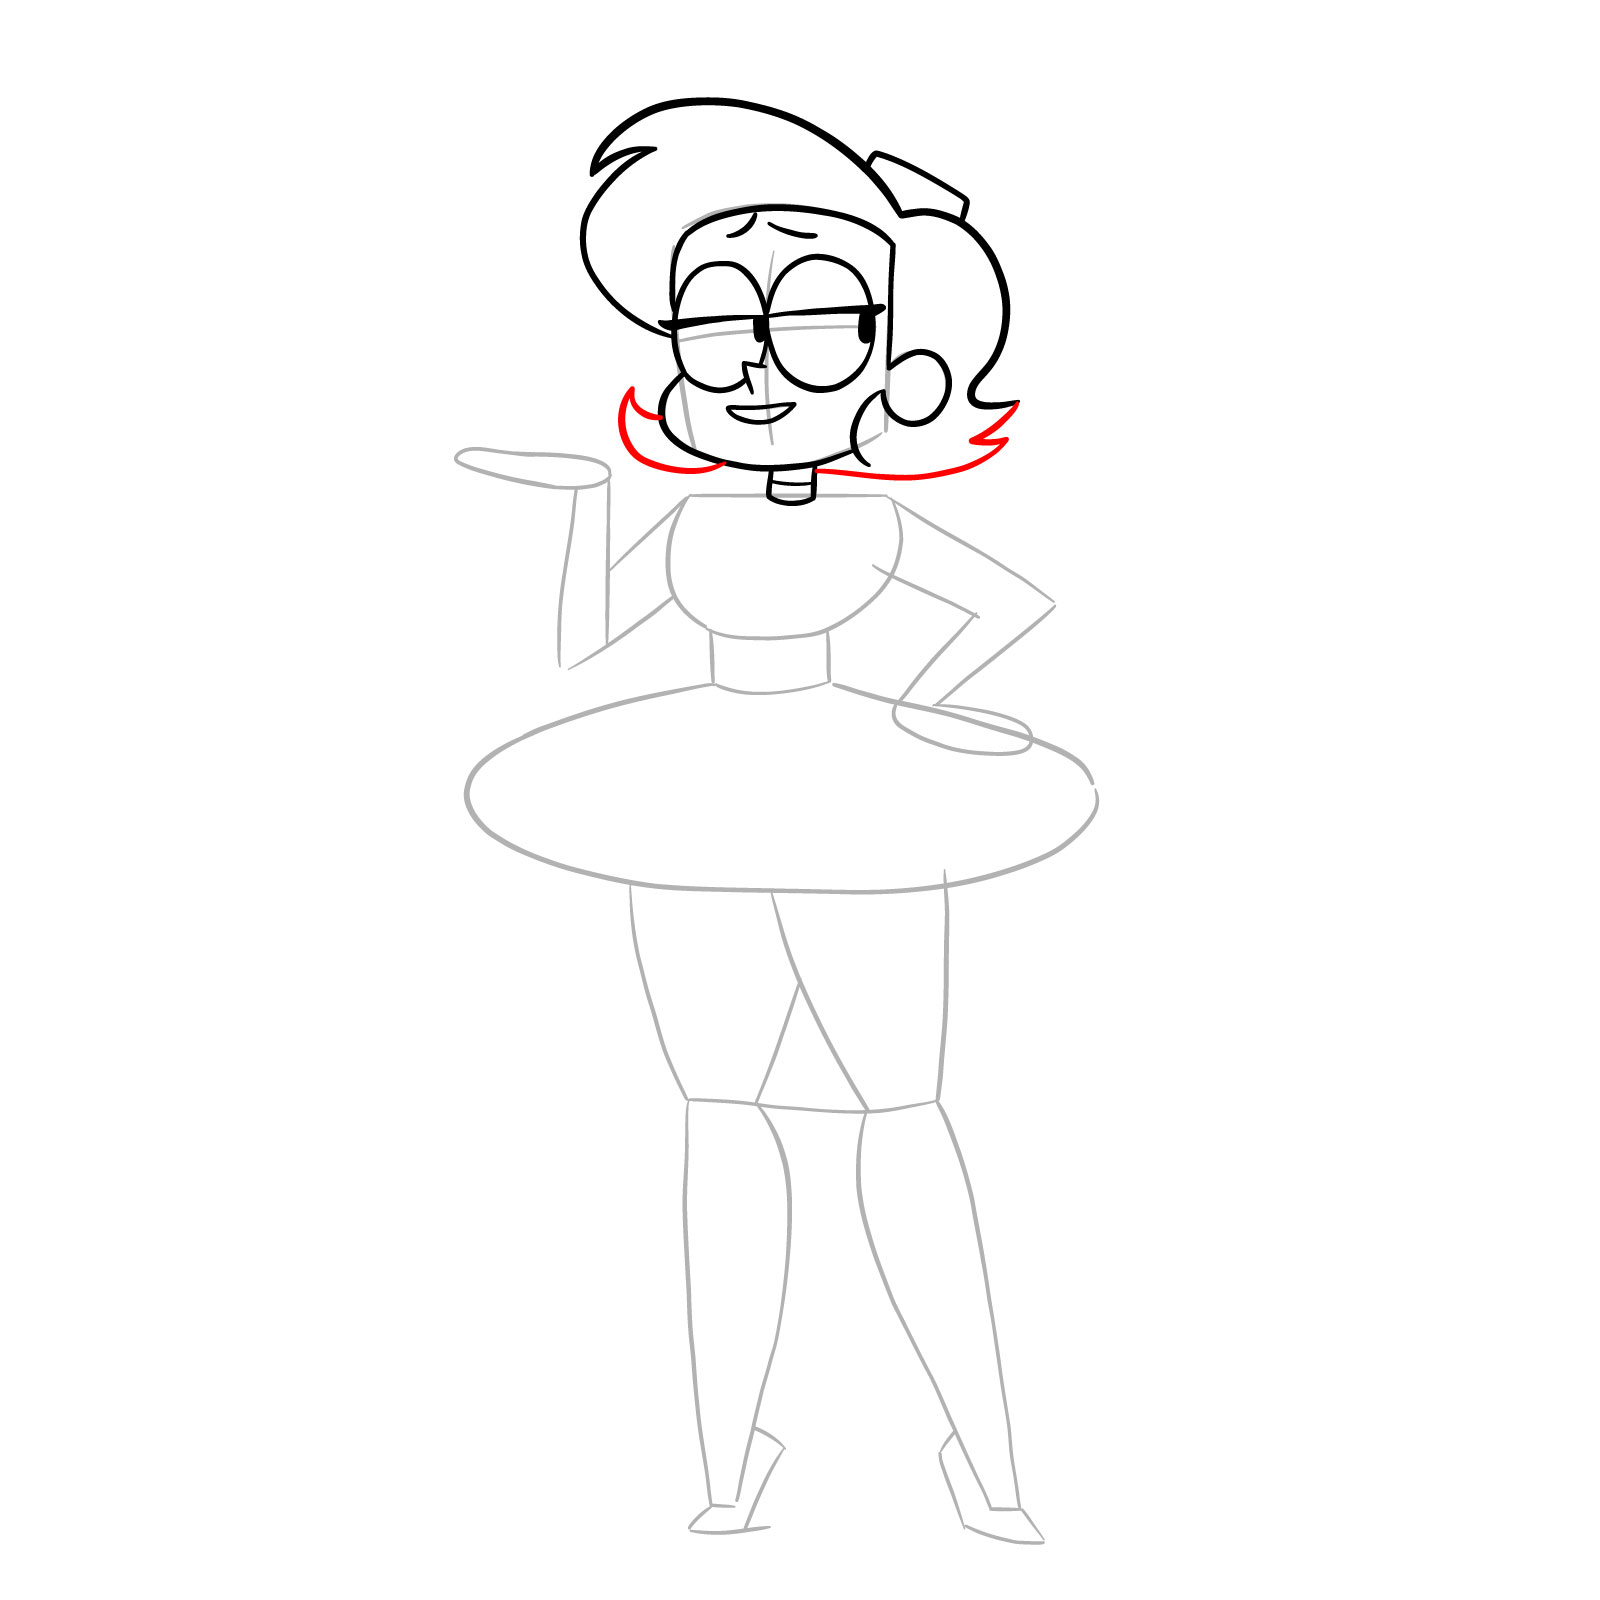 How to draw Elodie from OK K.O.! - step 13